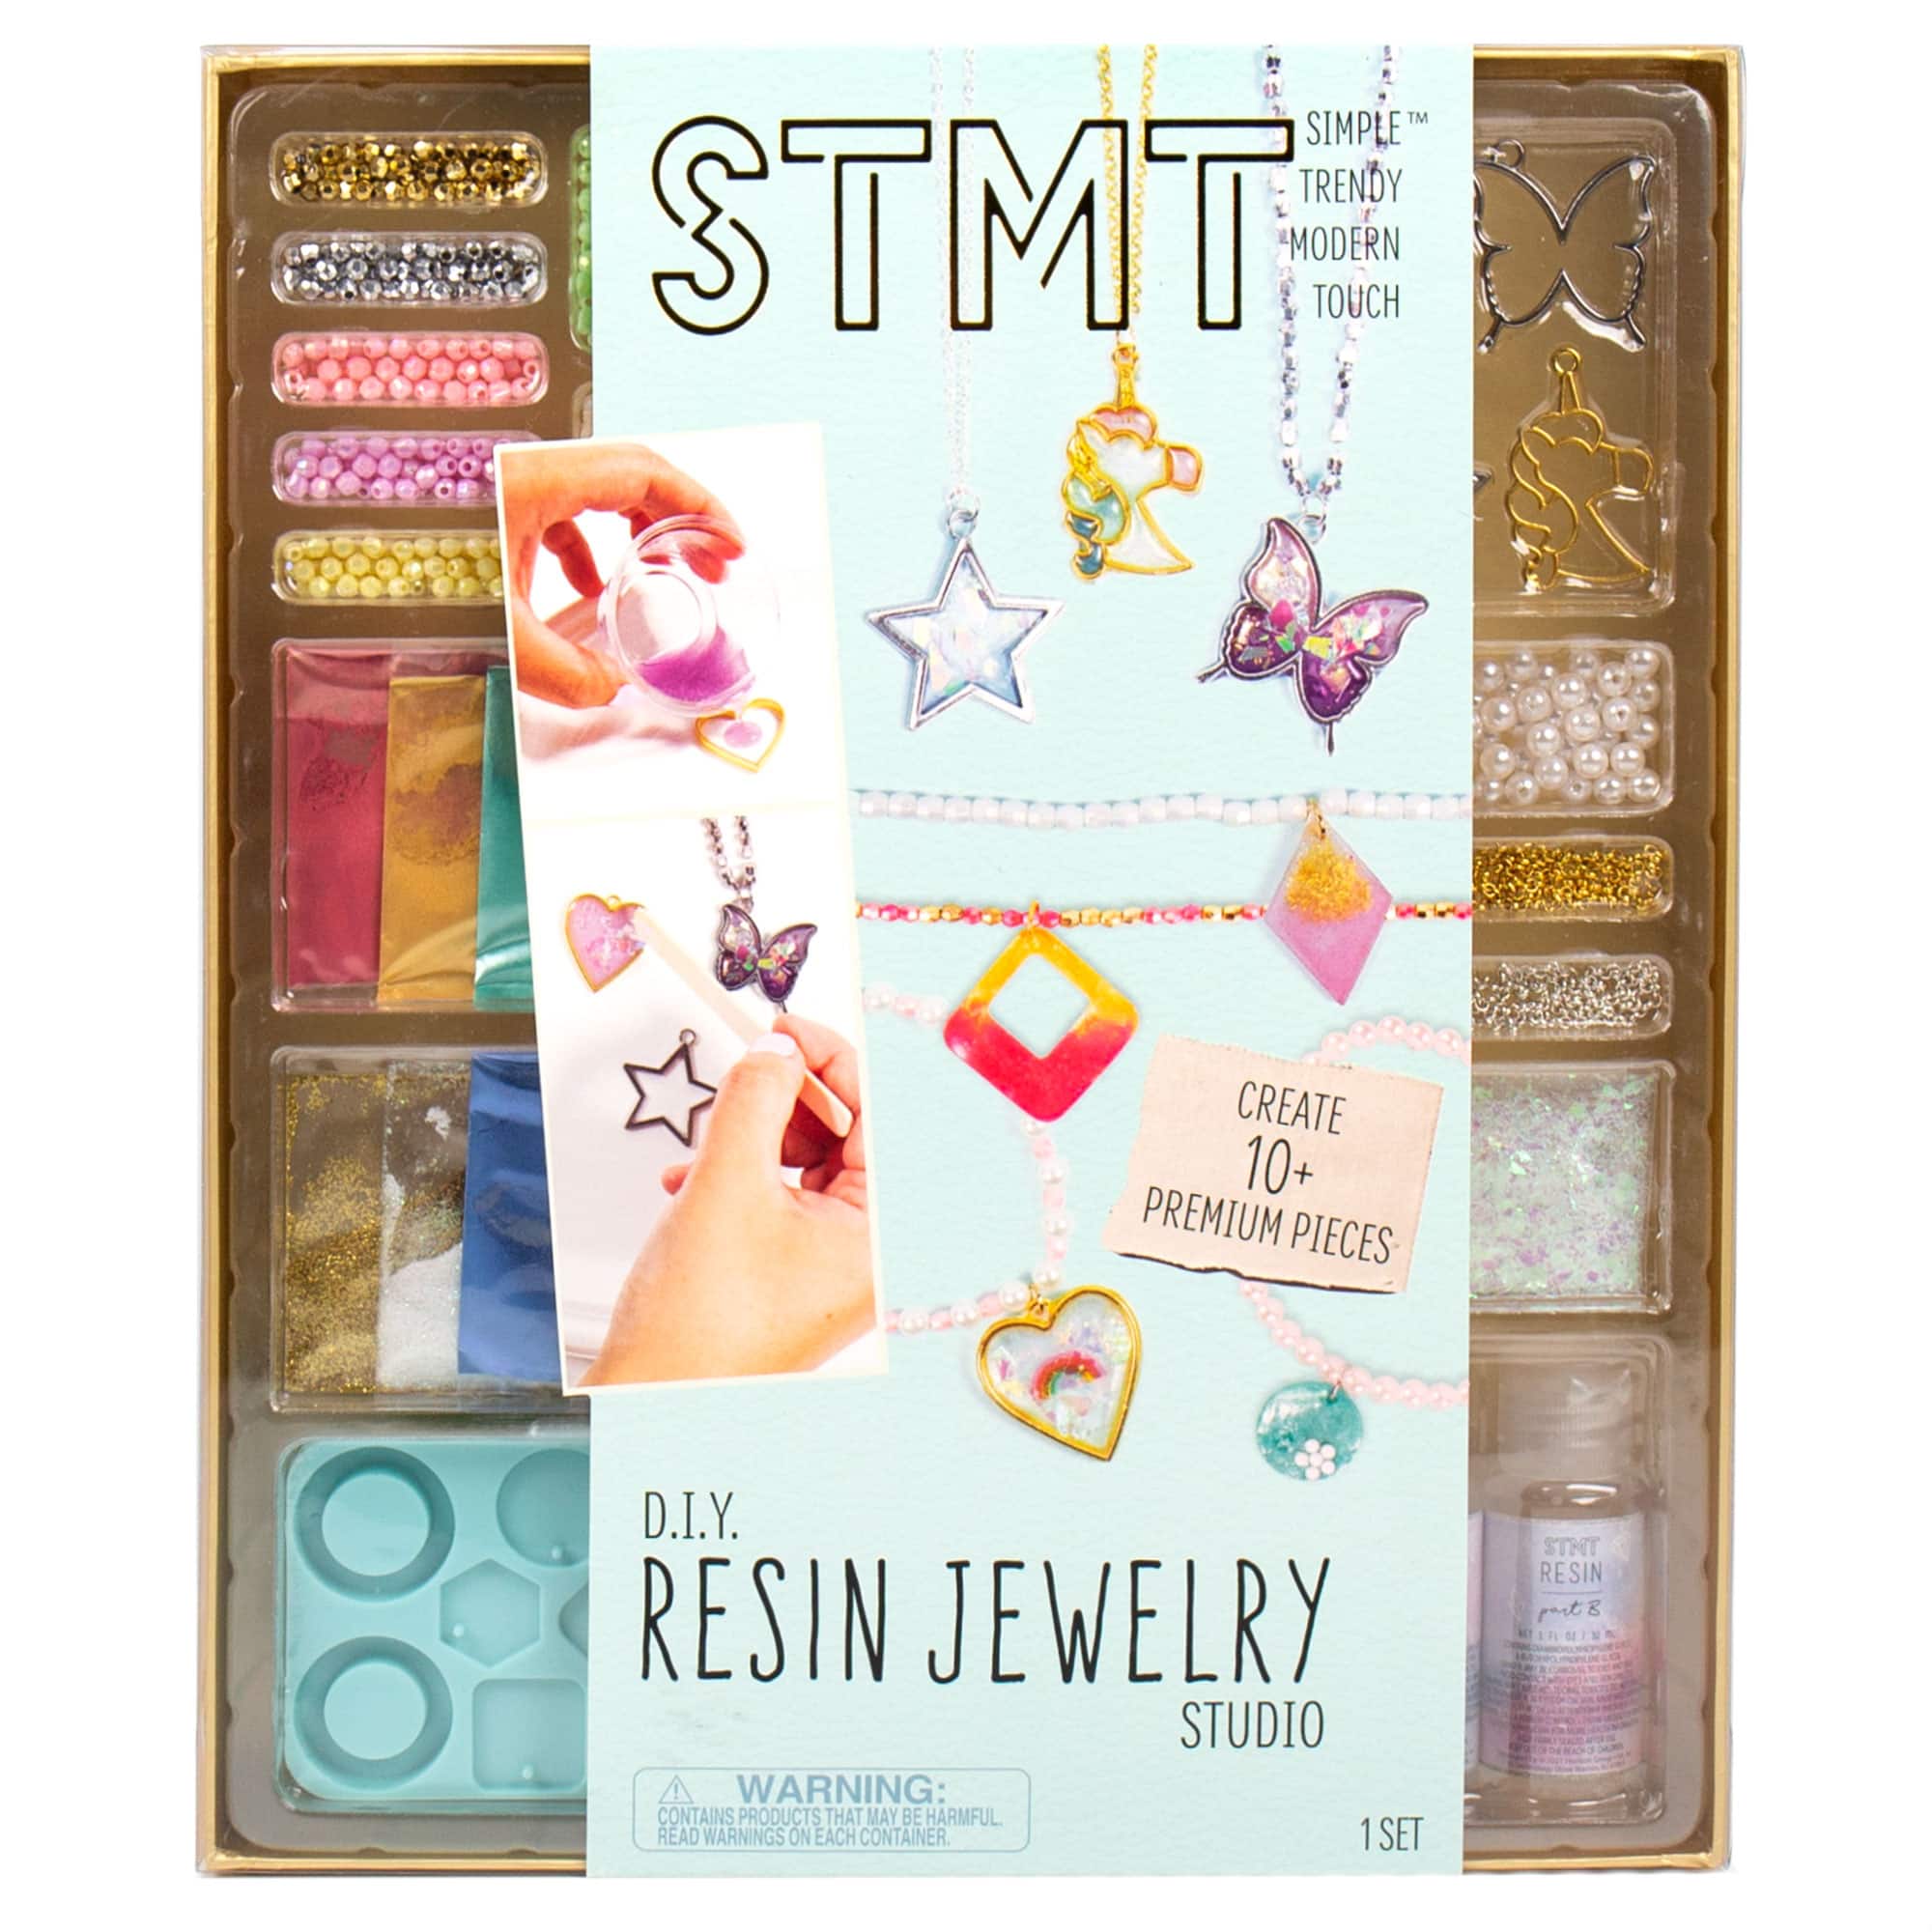 How to Make Your Own STMT DIY Resin Jewelry